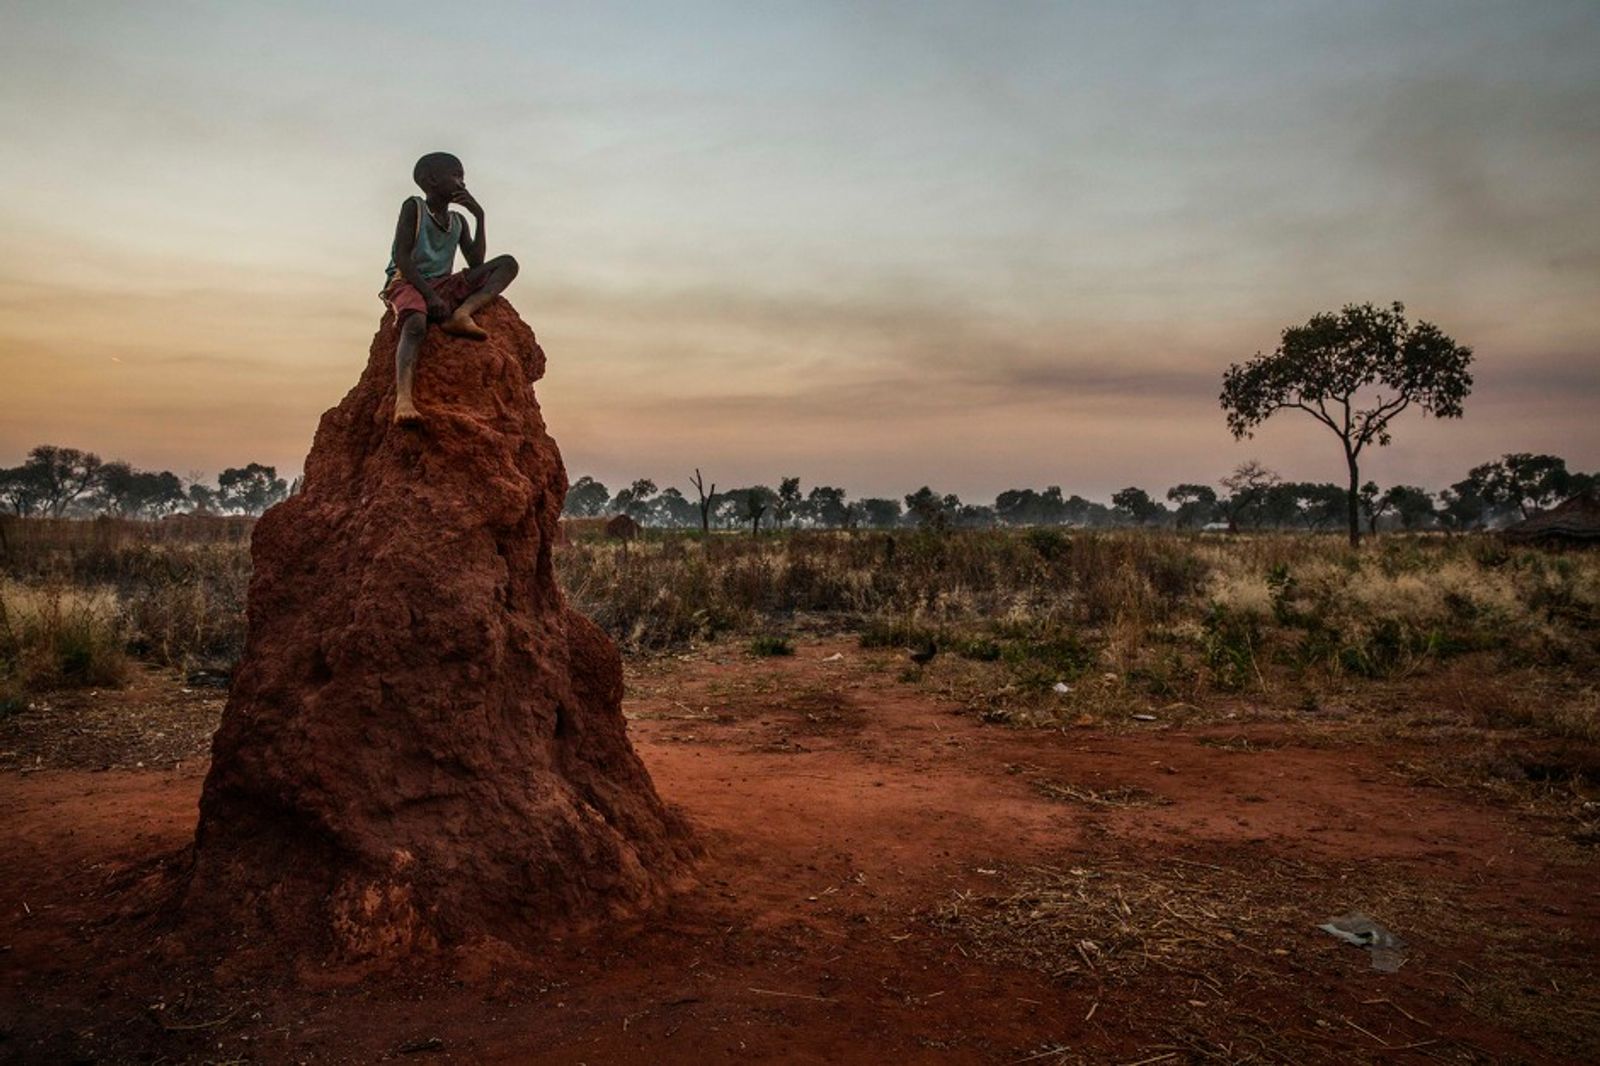 © Marco Gualazzini - Image from the Sudan Border War photography project